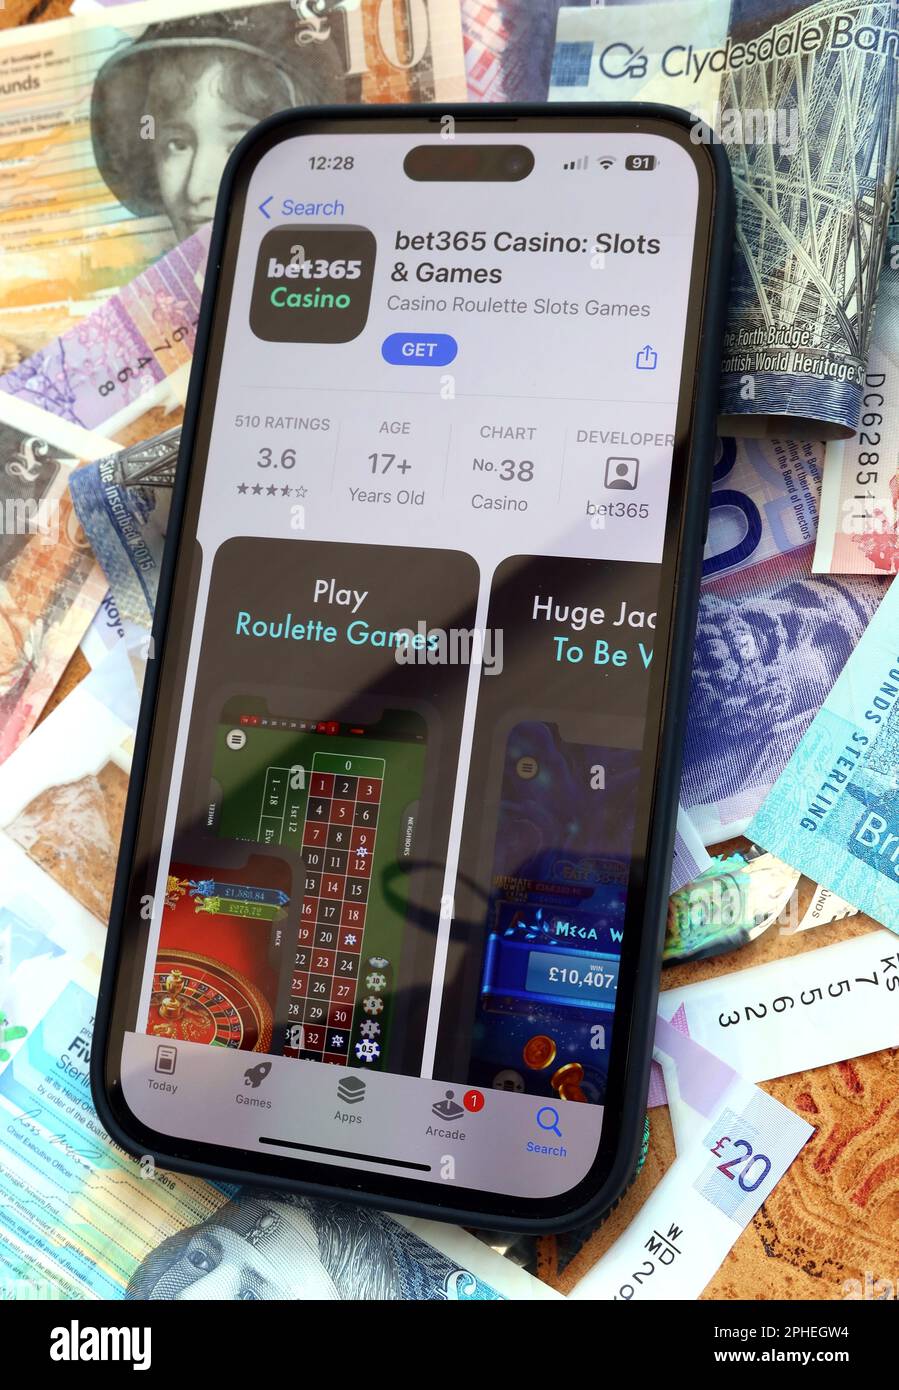 Bet365 Online and smartphone casino, slots and gambling app with Scottish Sterling notes, money easily lost - BeGambleAware Stock Photo